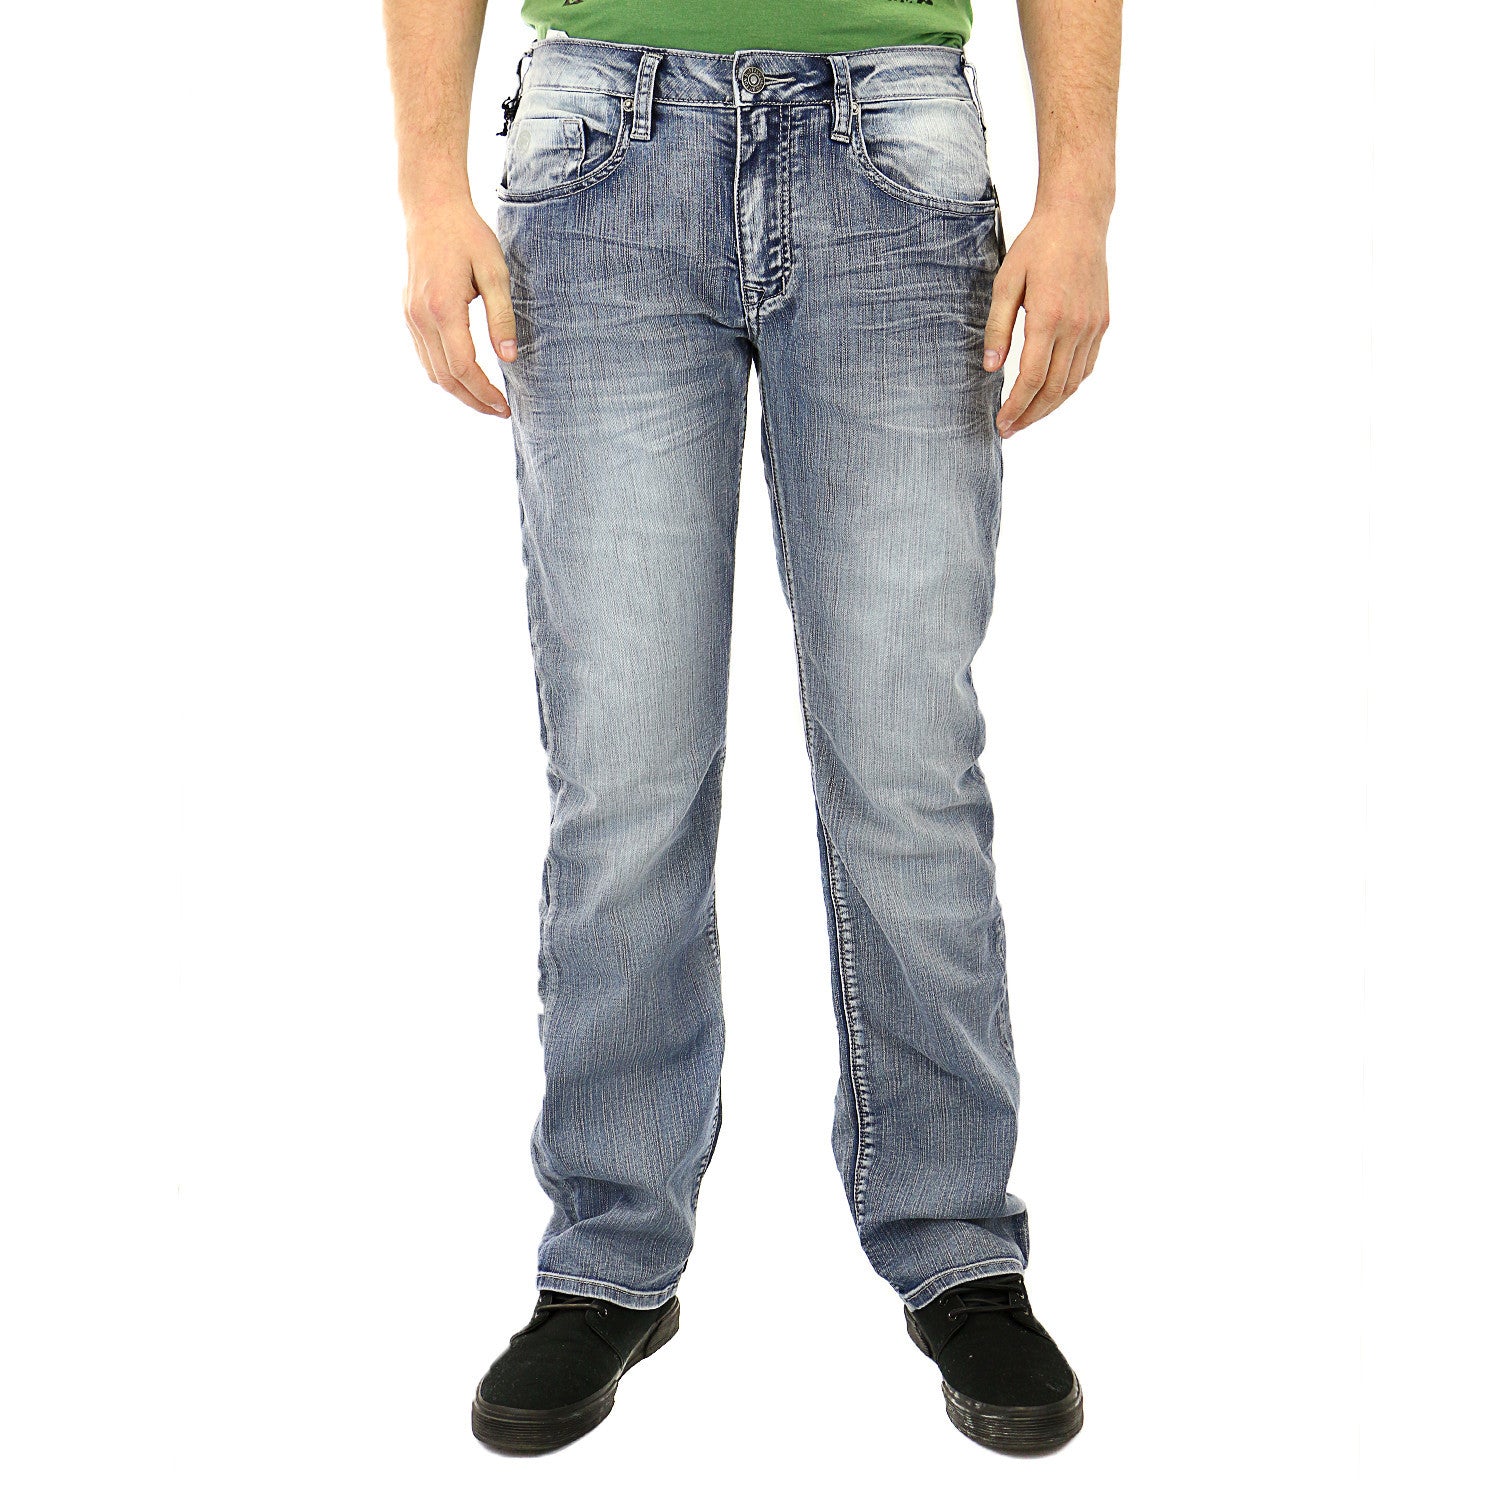 Update more than 170 mens white denim jeans bootcut